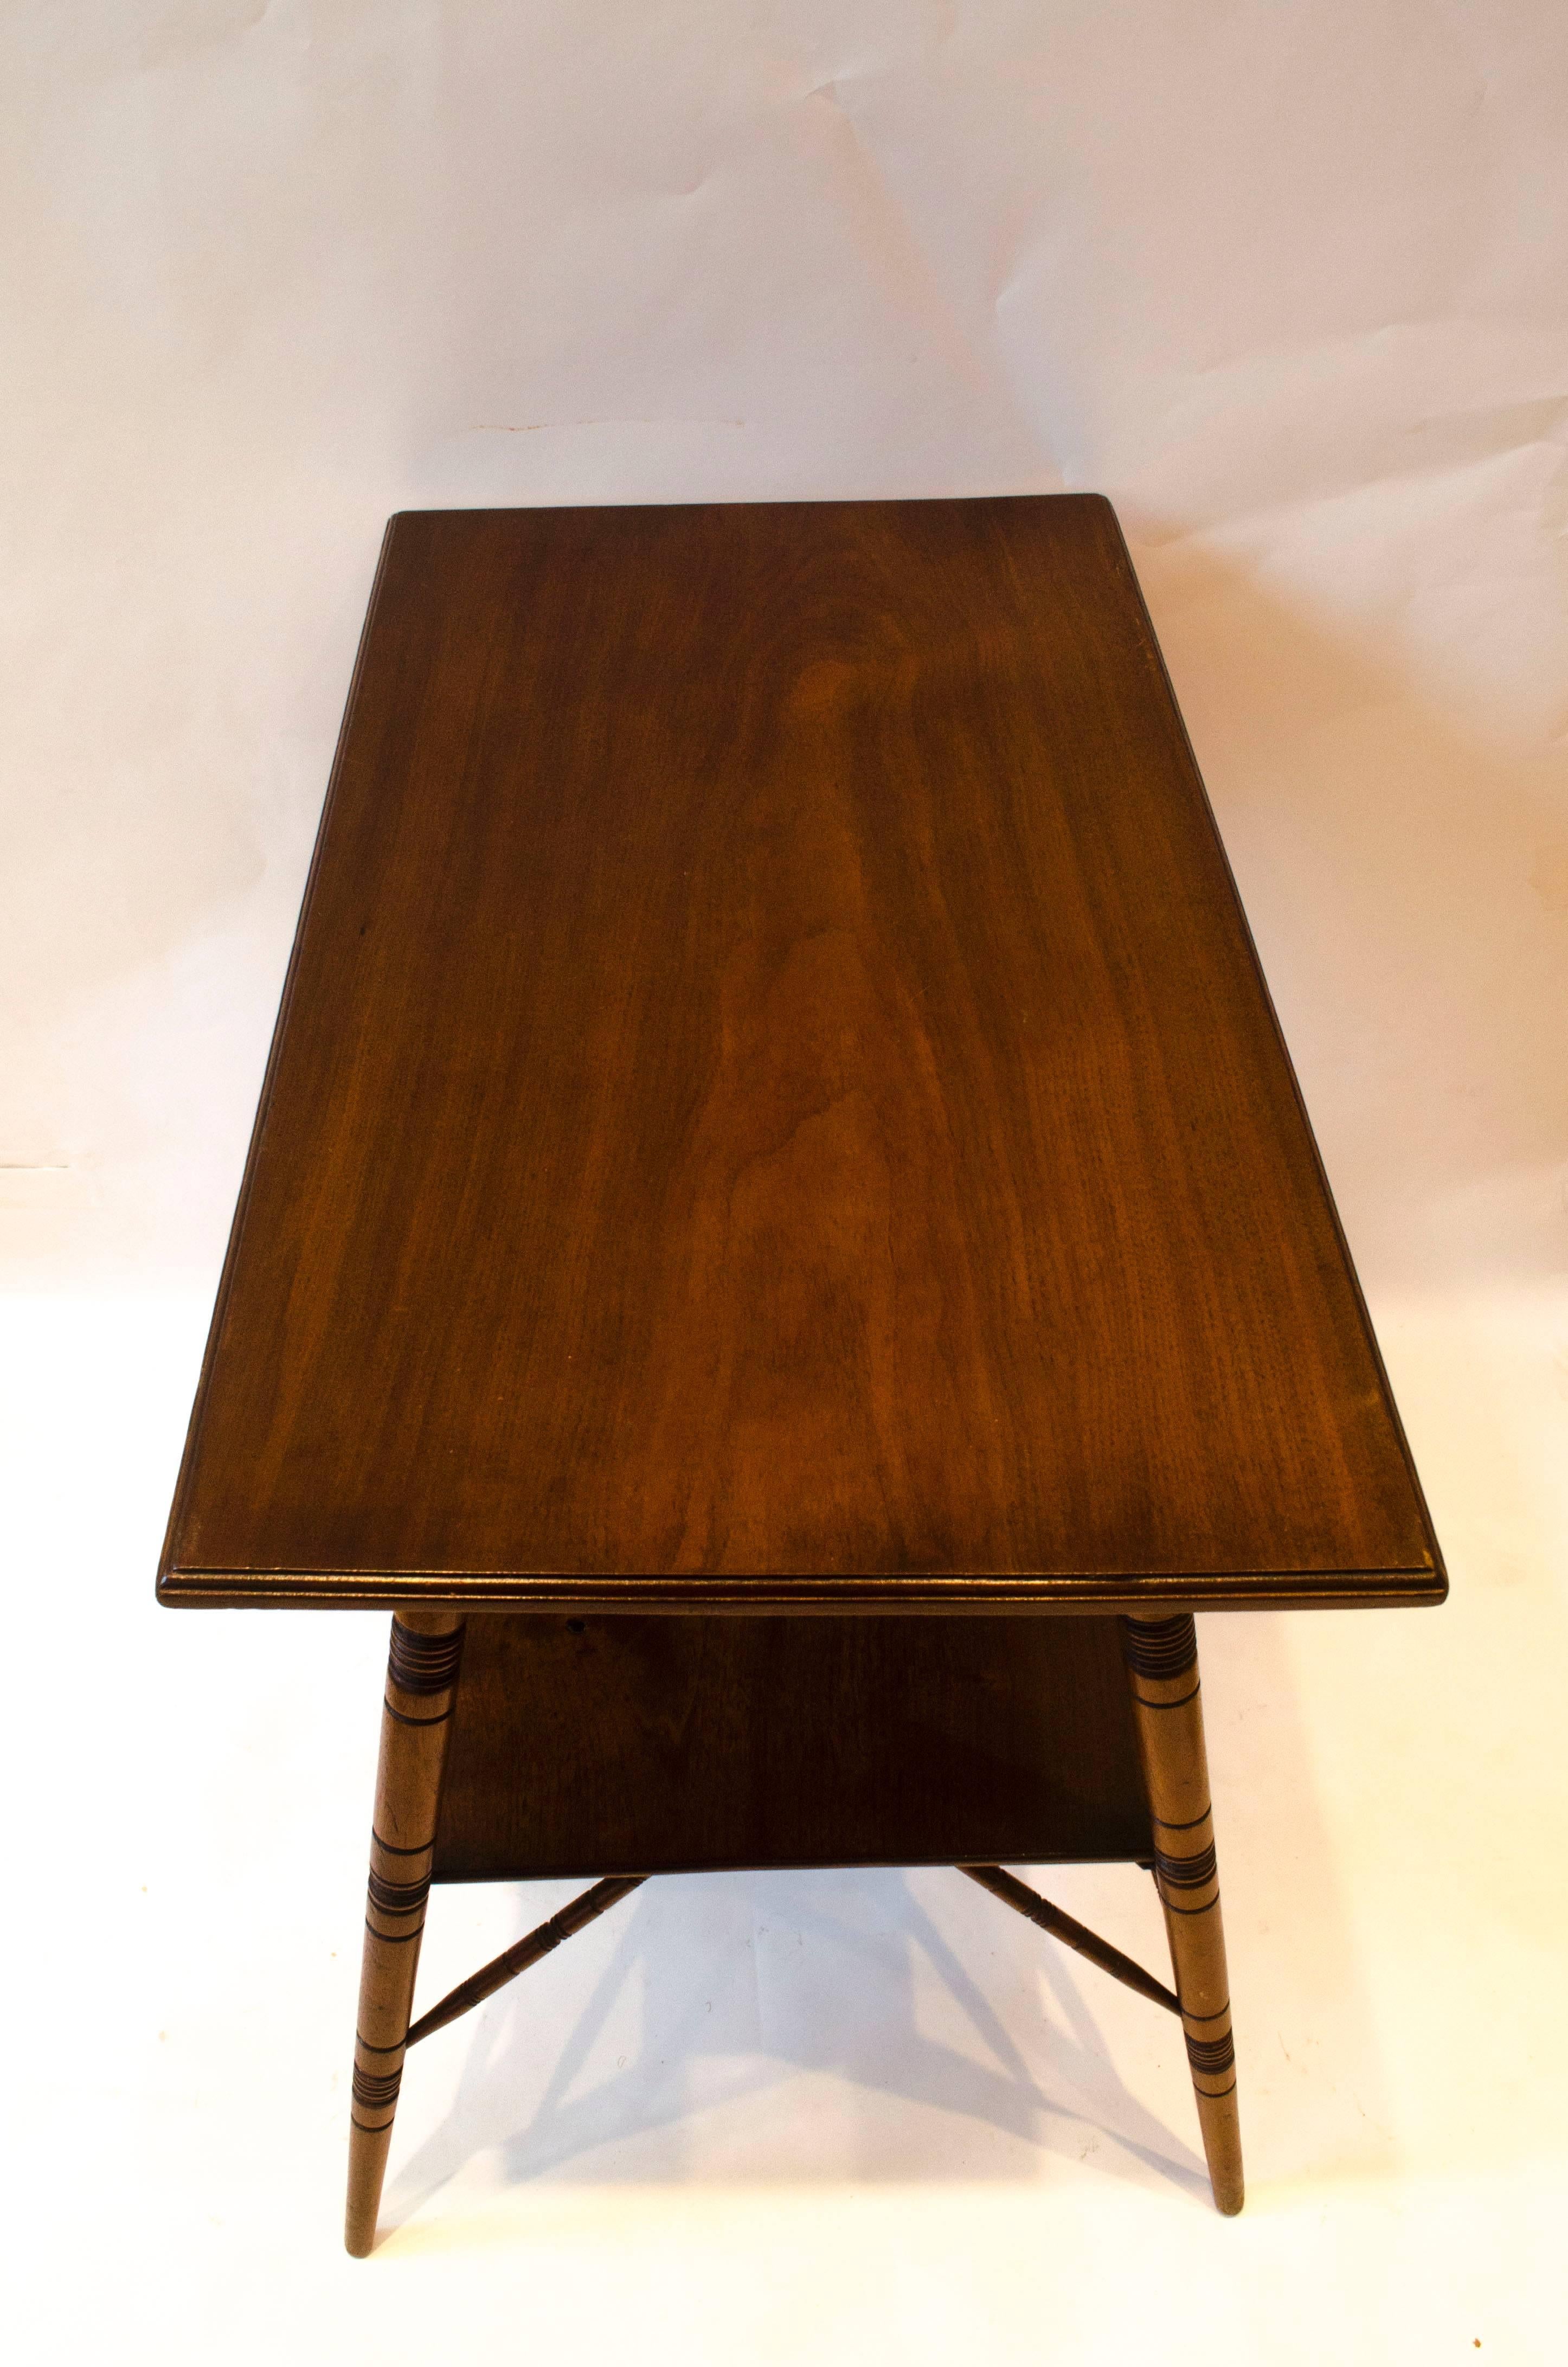 A Rare Pair of Anglo-Japanese two-tier Walnut Side Tables by Jas Shoolbred 1